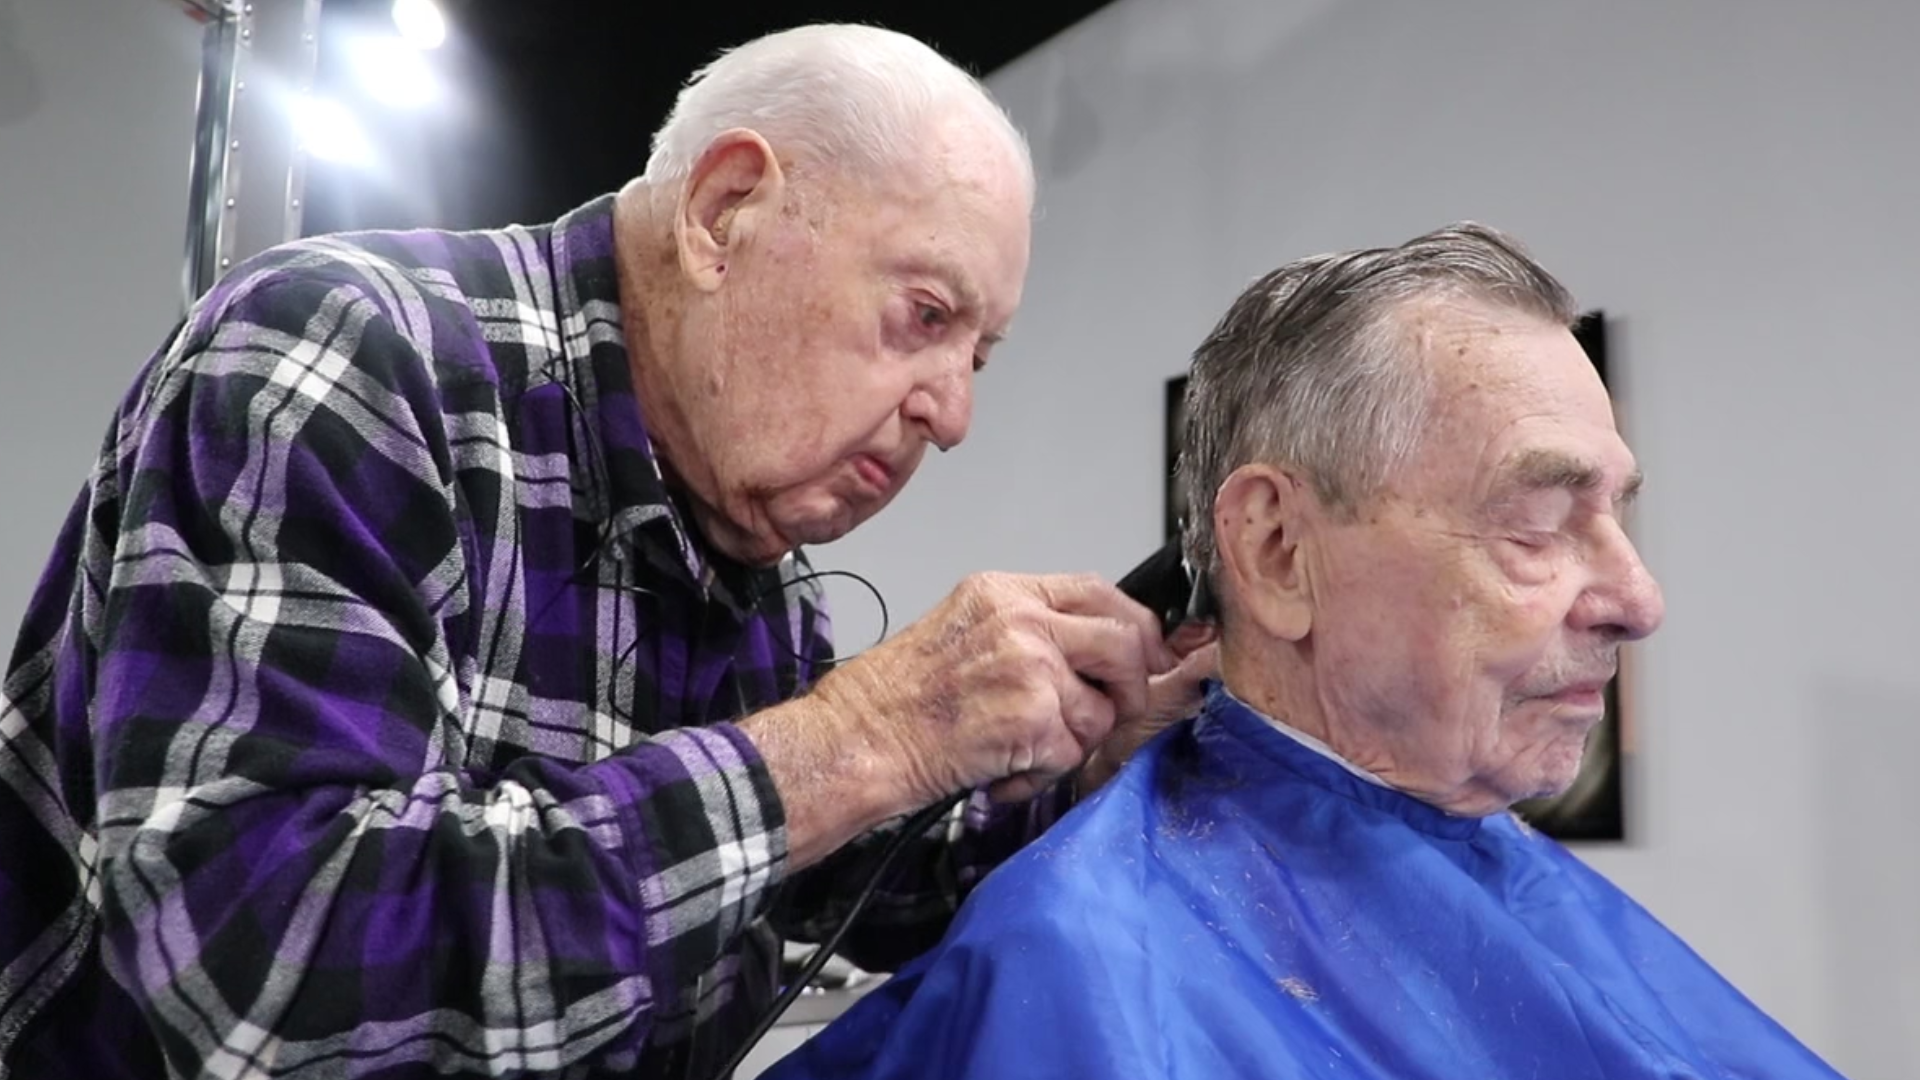 Doug Brewer has been cutting hair for more than 73 years, and at 92 years young, he has no plans on stopping anytime soon.